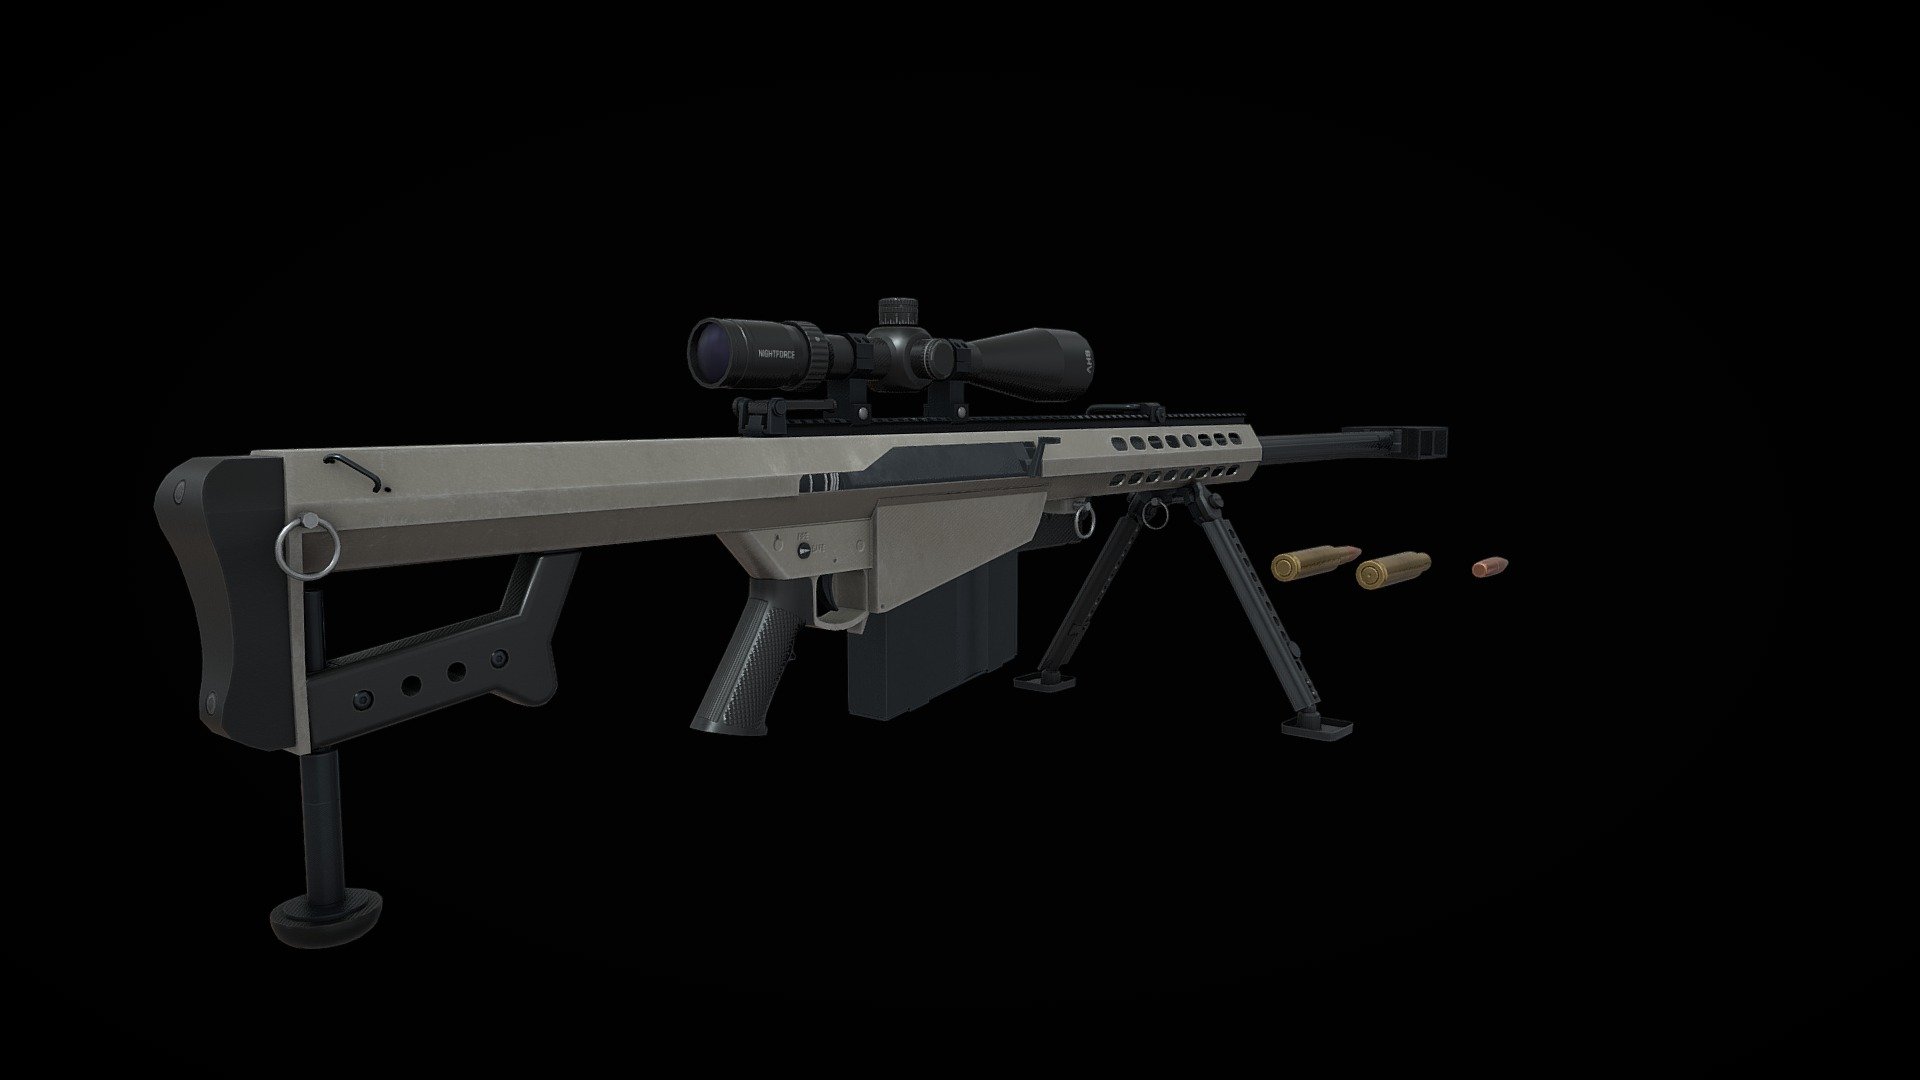 Barrett M82 A1 NightForce SHV 4-14x50 F1 Scope Magazine and .50 Cal Rounds.

Barrett gun has 3 materials, Scope has 1 material and the magazine and .50 cal cartridge has 1 shared material with 4k textures.

M82 Main Body : 31,718 Tris
Night Force Scope : 13,469 Tris
M82 Magazine :  3,466 Tris
.50 BMG, 12.7×99mm NATO Cartridge : 1,434 Tris
.50 BMG, 12.7×99mm NATO Bullet : 702 Tris
.50 BMG, 12.7×99mm NATO Cartridge (Fired) : 732 Tris - Barrett-M82 (Optimized) - Download Free 3D model by Gintoki1234 3d model